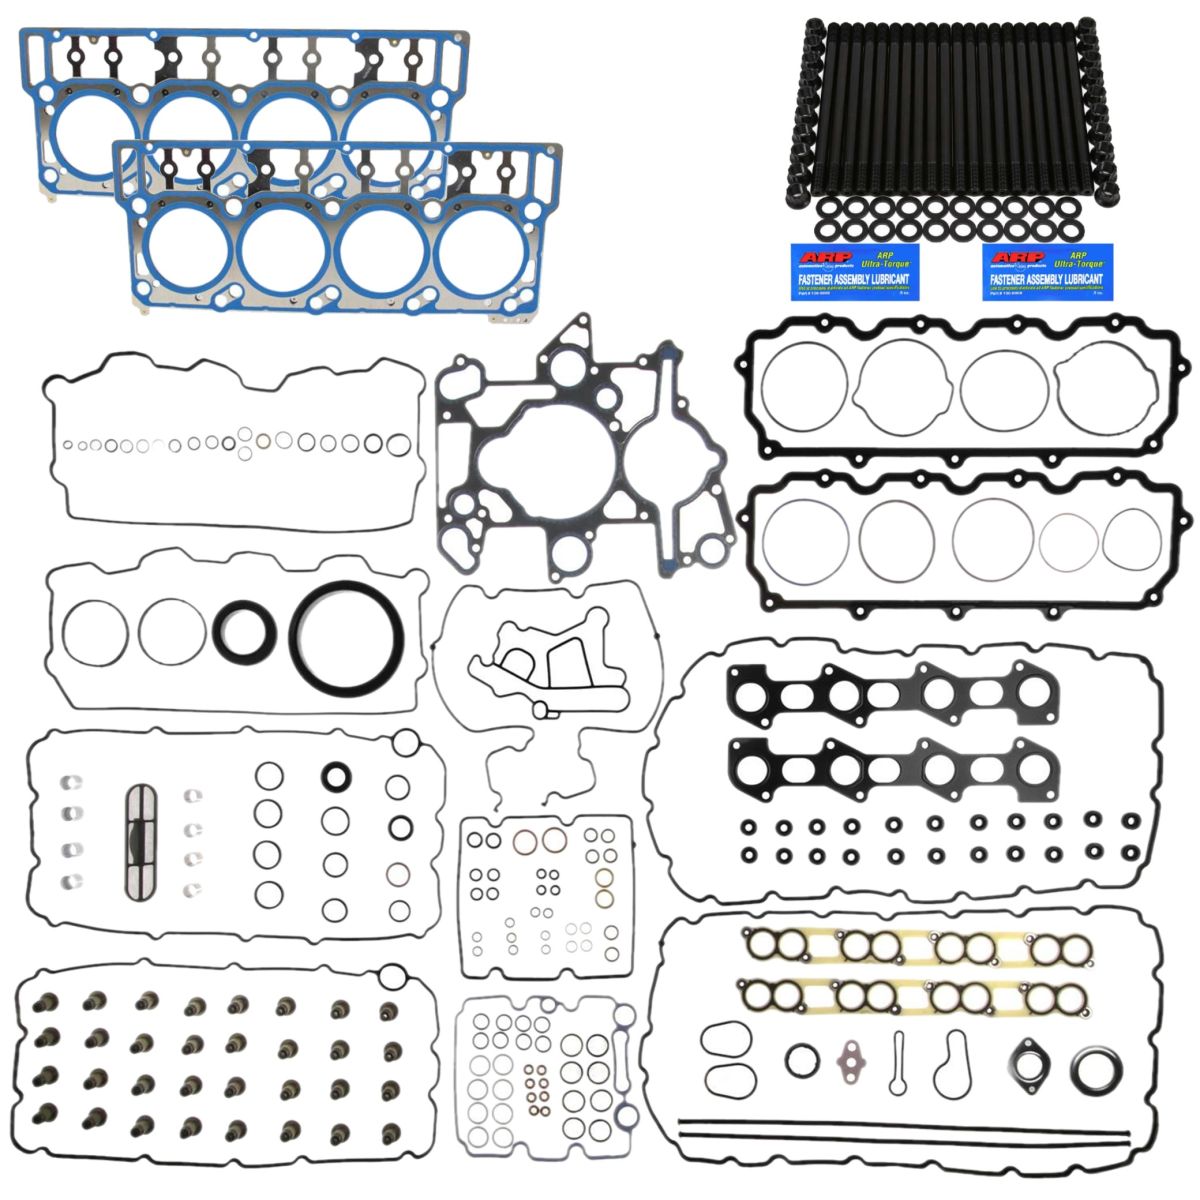 OEM Ford - OEM 18MM Head Gaskets/ARP Studs/Mahle Gasket Kit For 03-06 Ford 6.0L Powerstroke